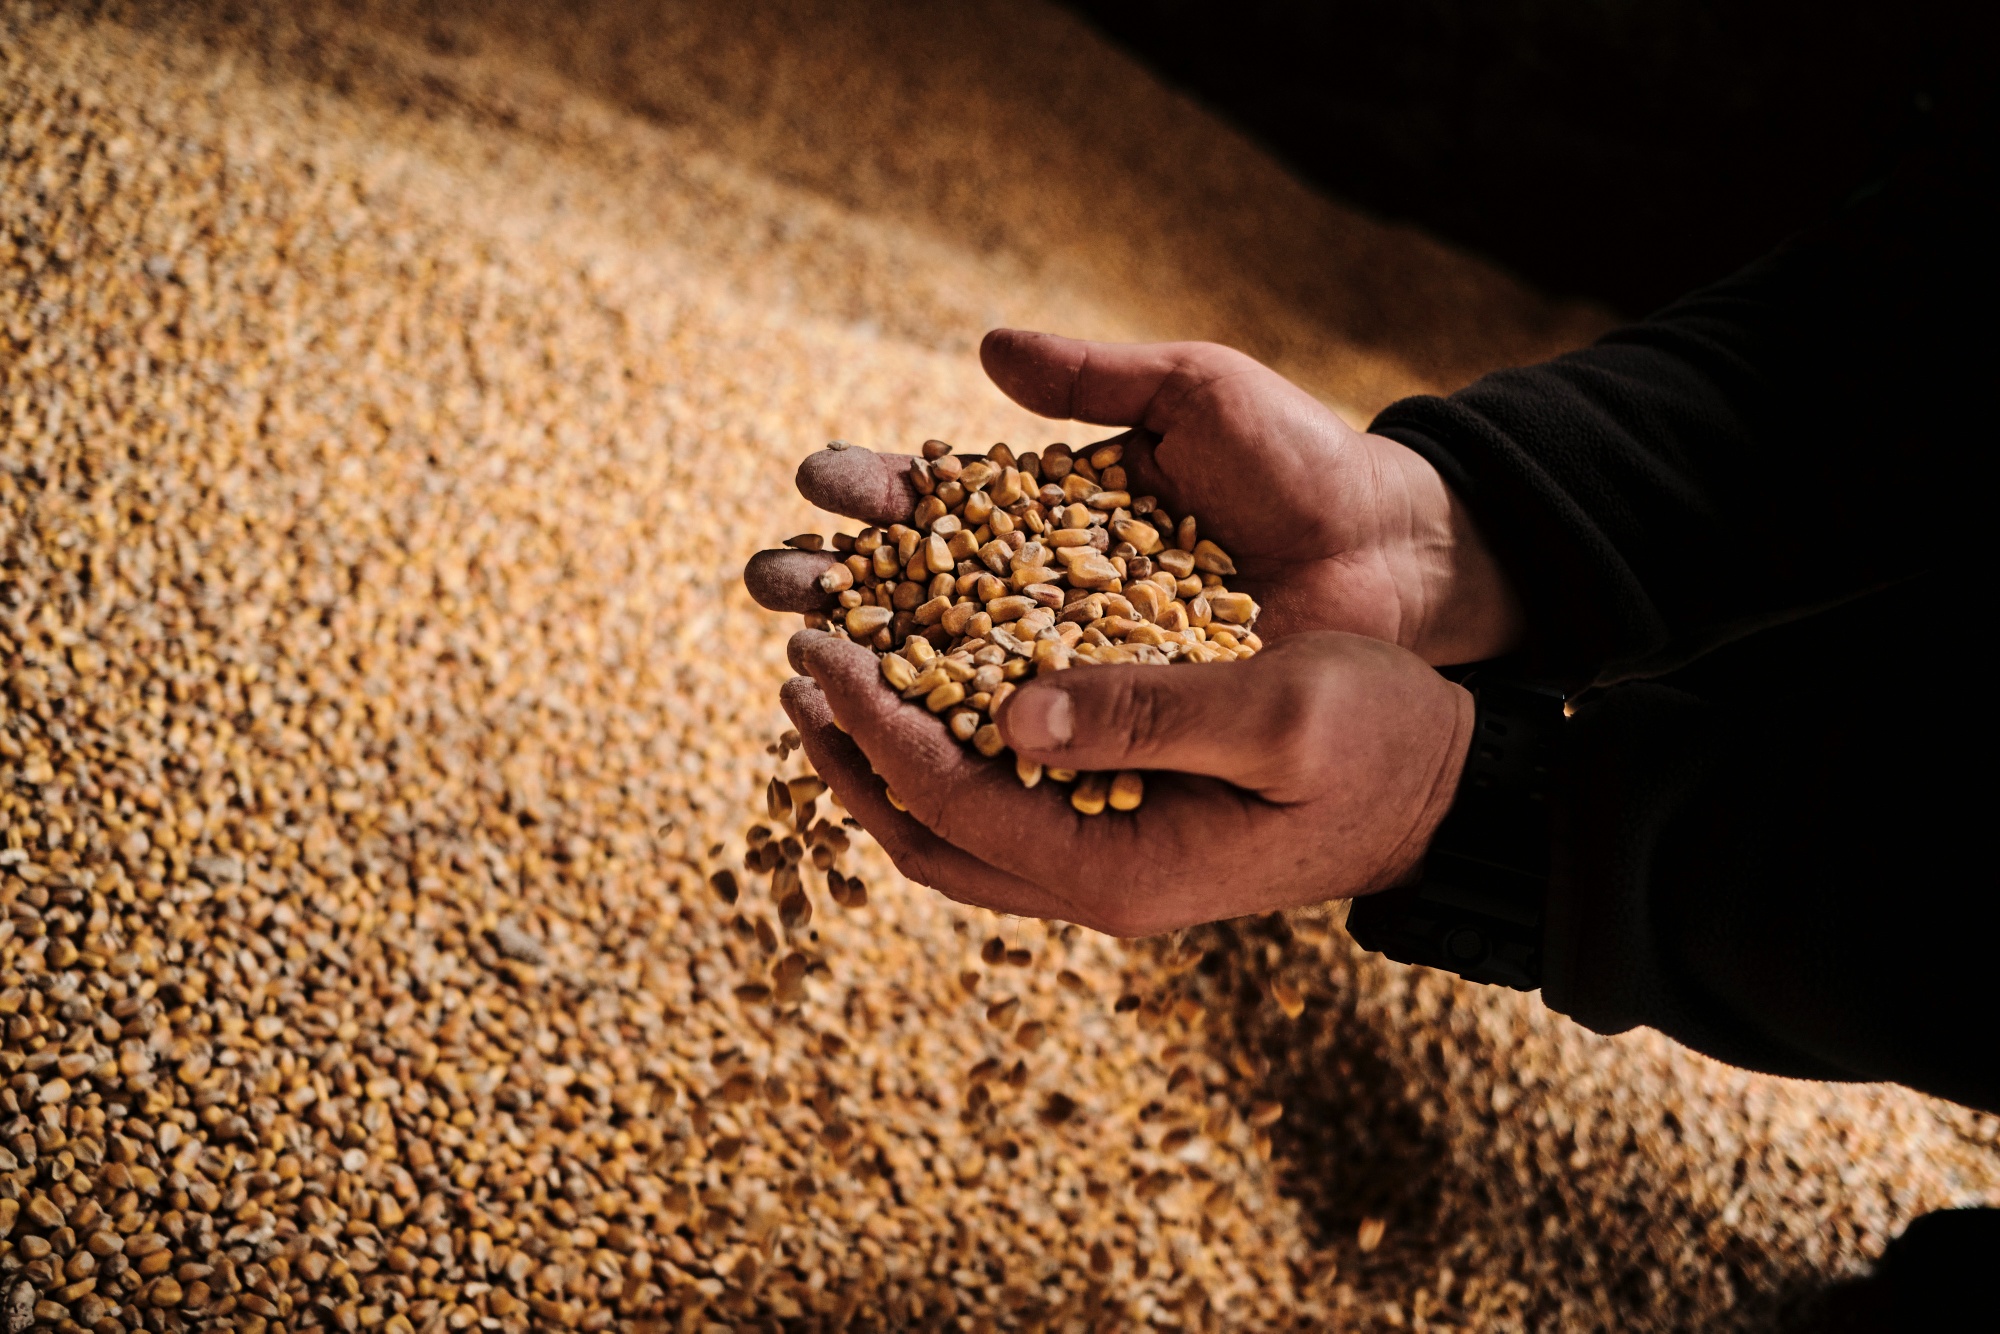 A farmer inspects unsold corn grain stores on a farm in Sedziejowo, Poland, earlier this month.